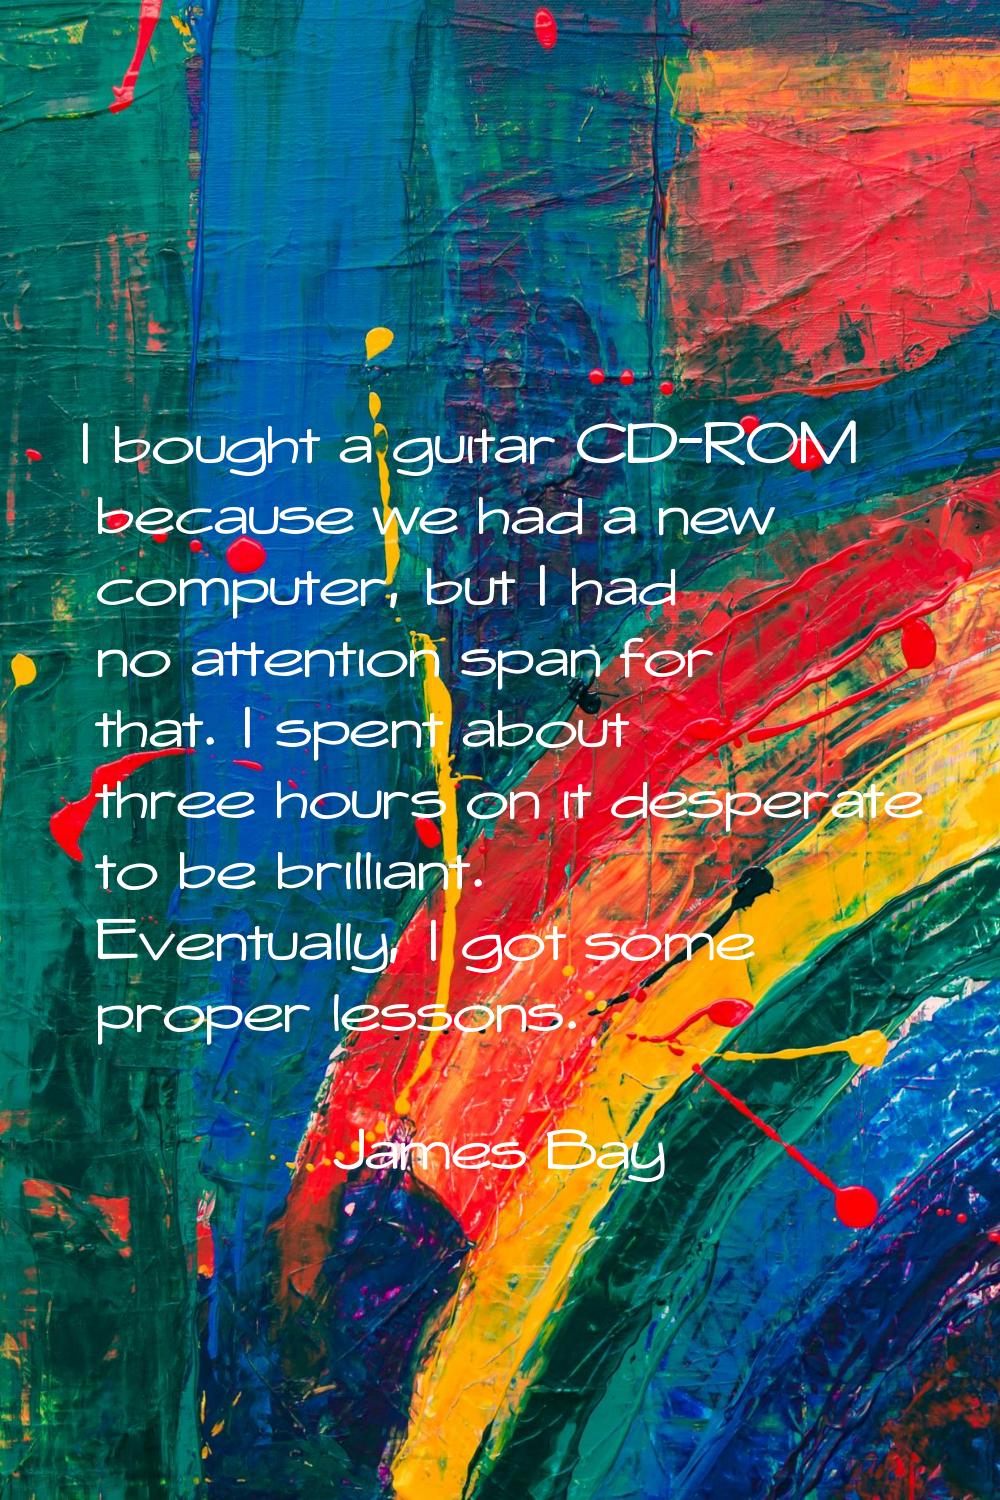 I bought a guitar CD-ROM because we had a new computer, but I had no attention span for that. I spe